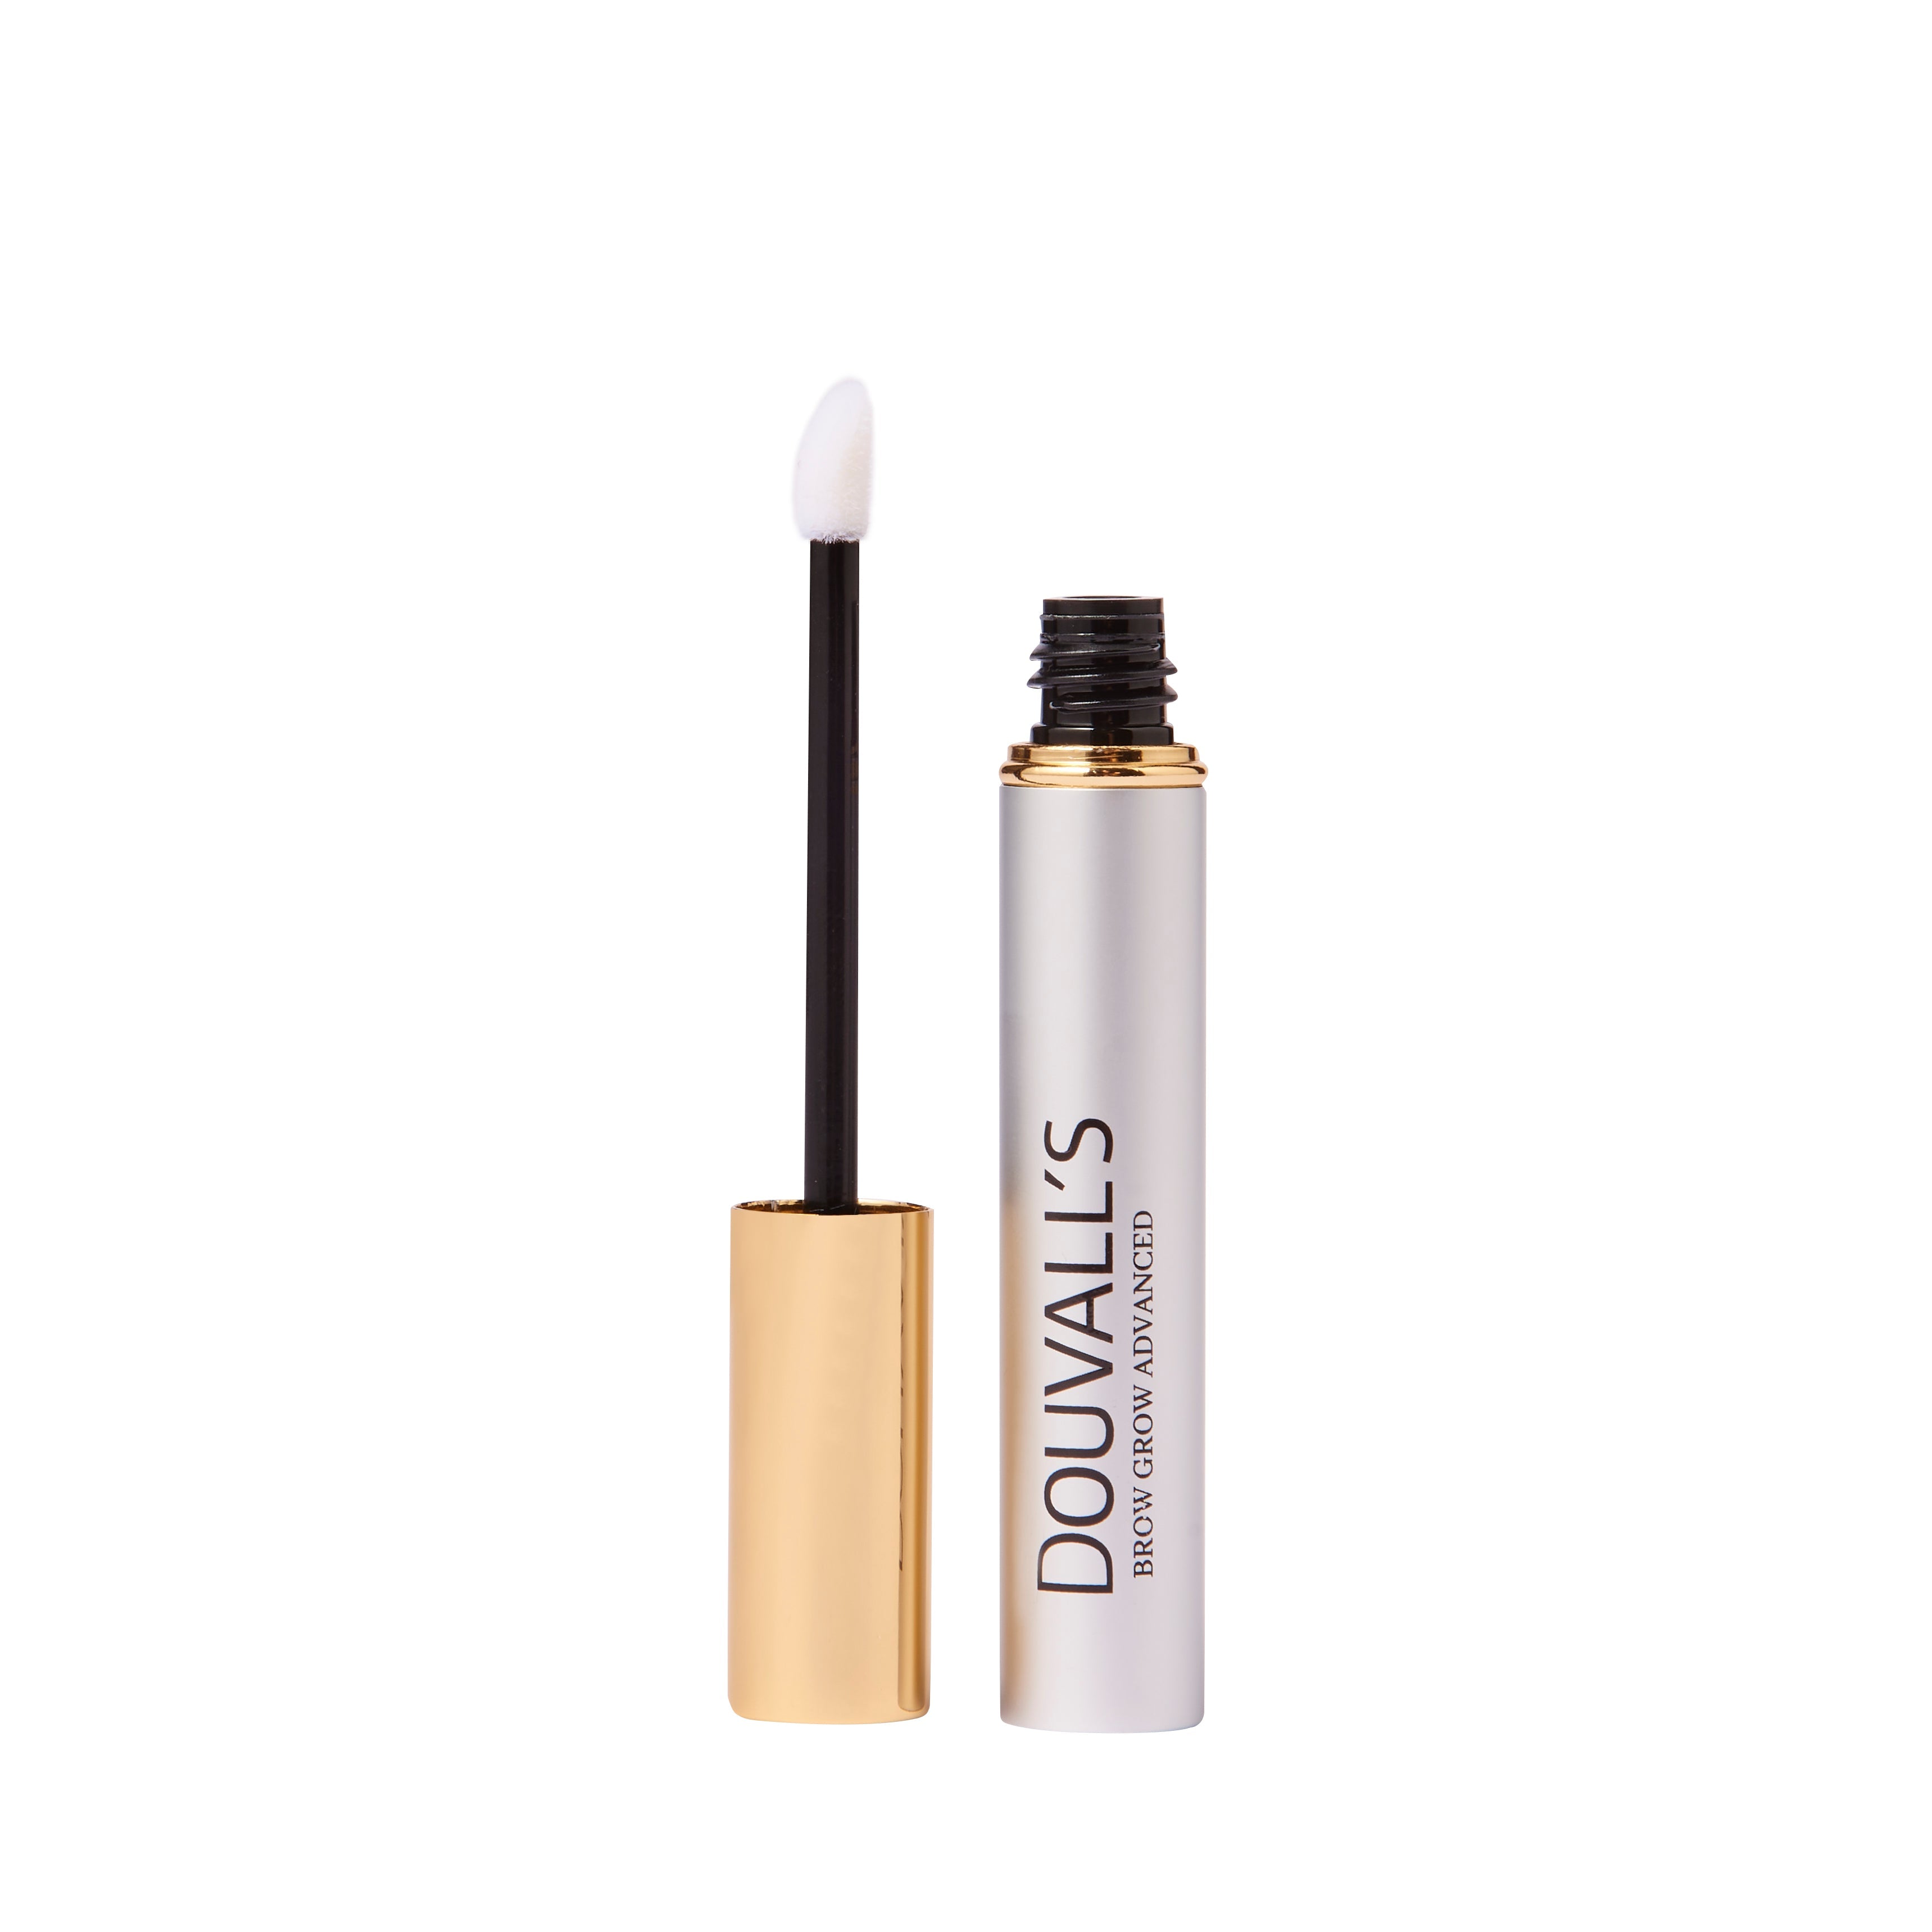 Brow Grow Advanced Conditioning Serum 2ml | Strengthen and Thicken Sparse Eyebrows-0